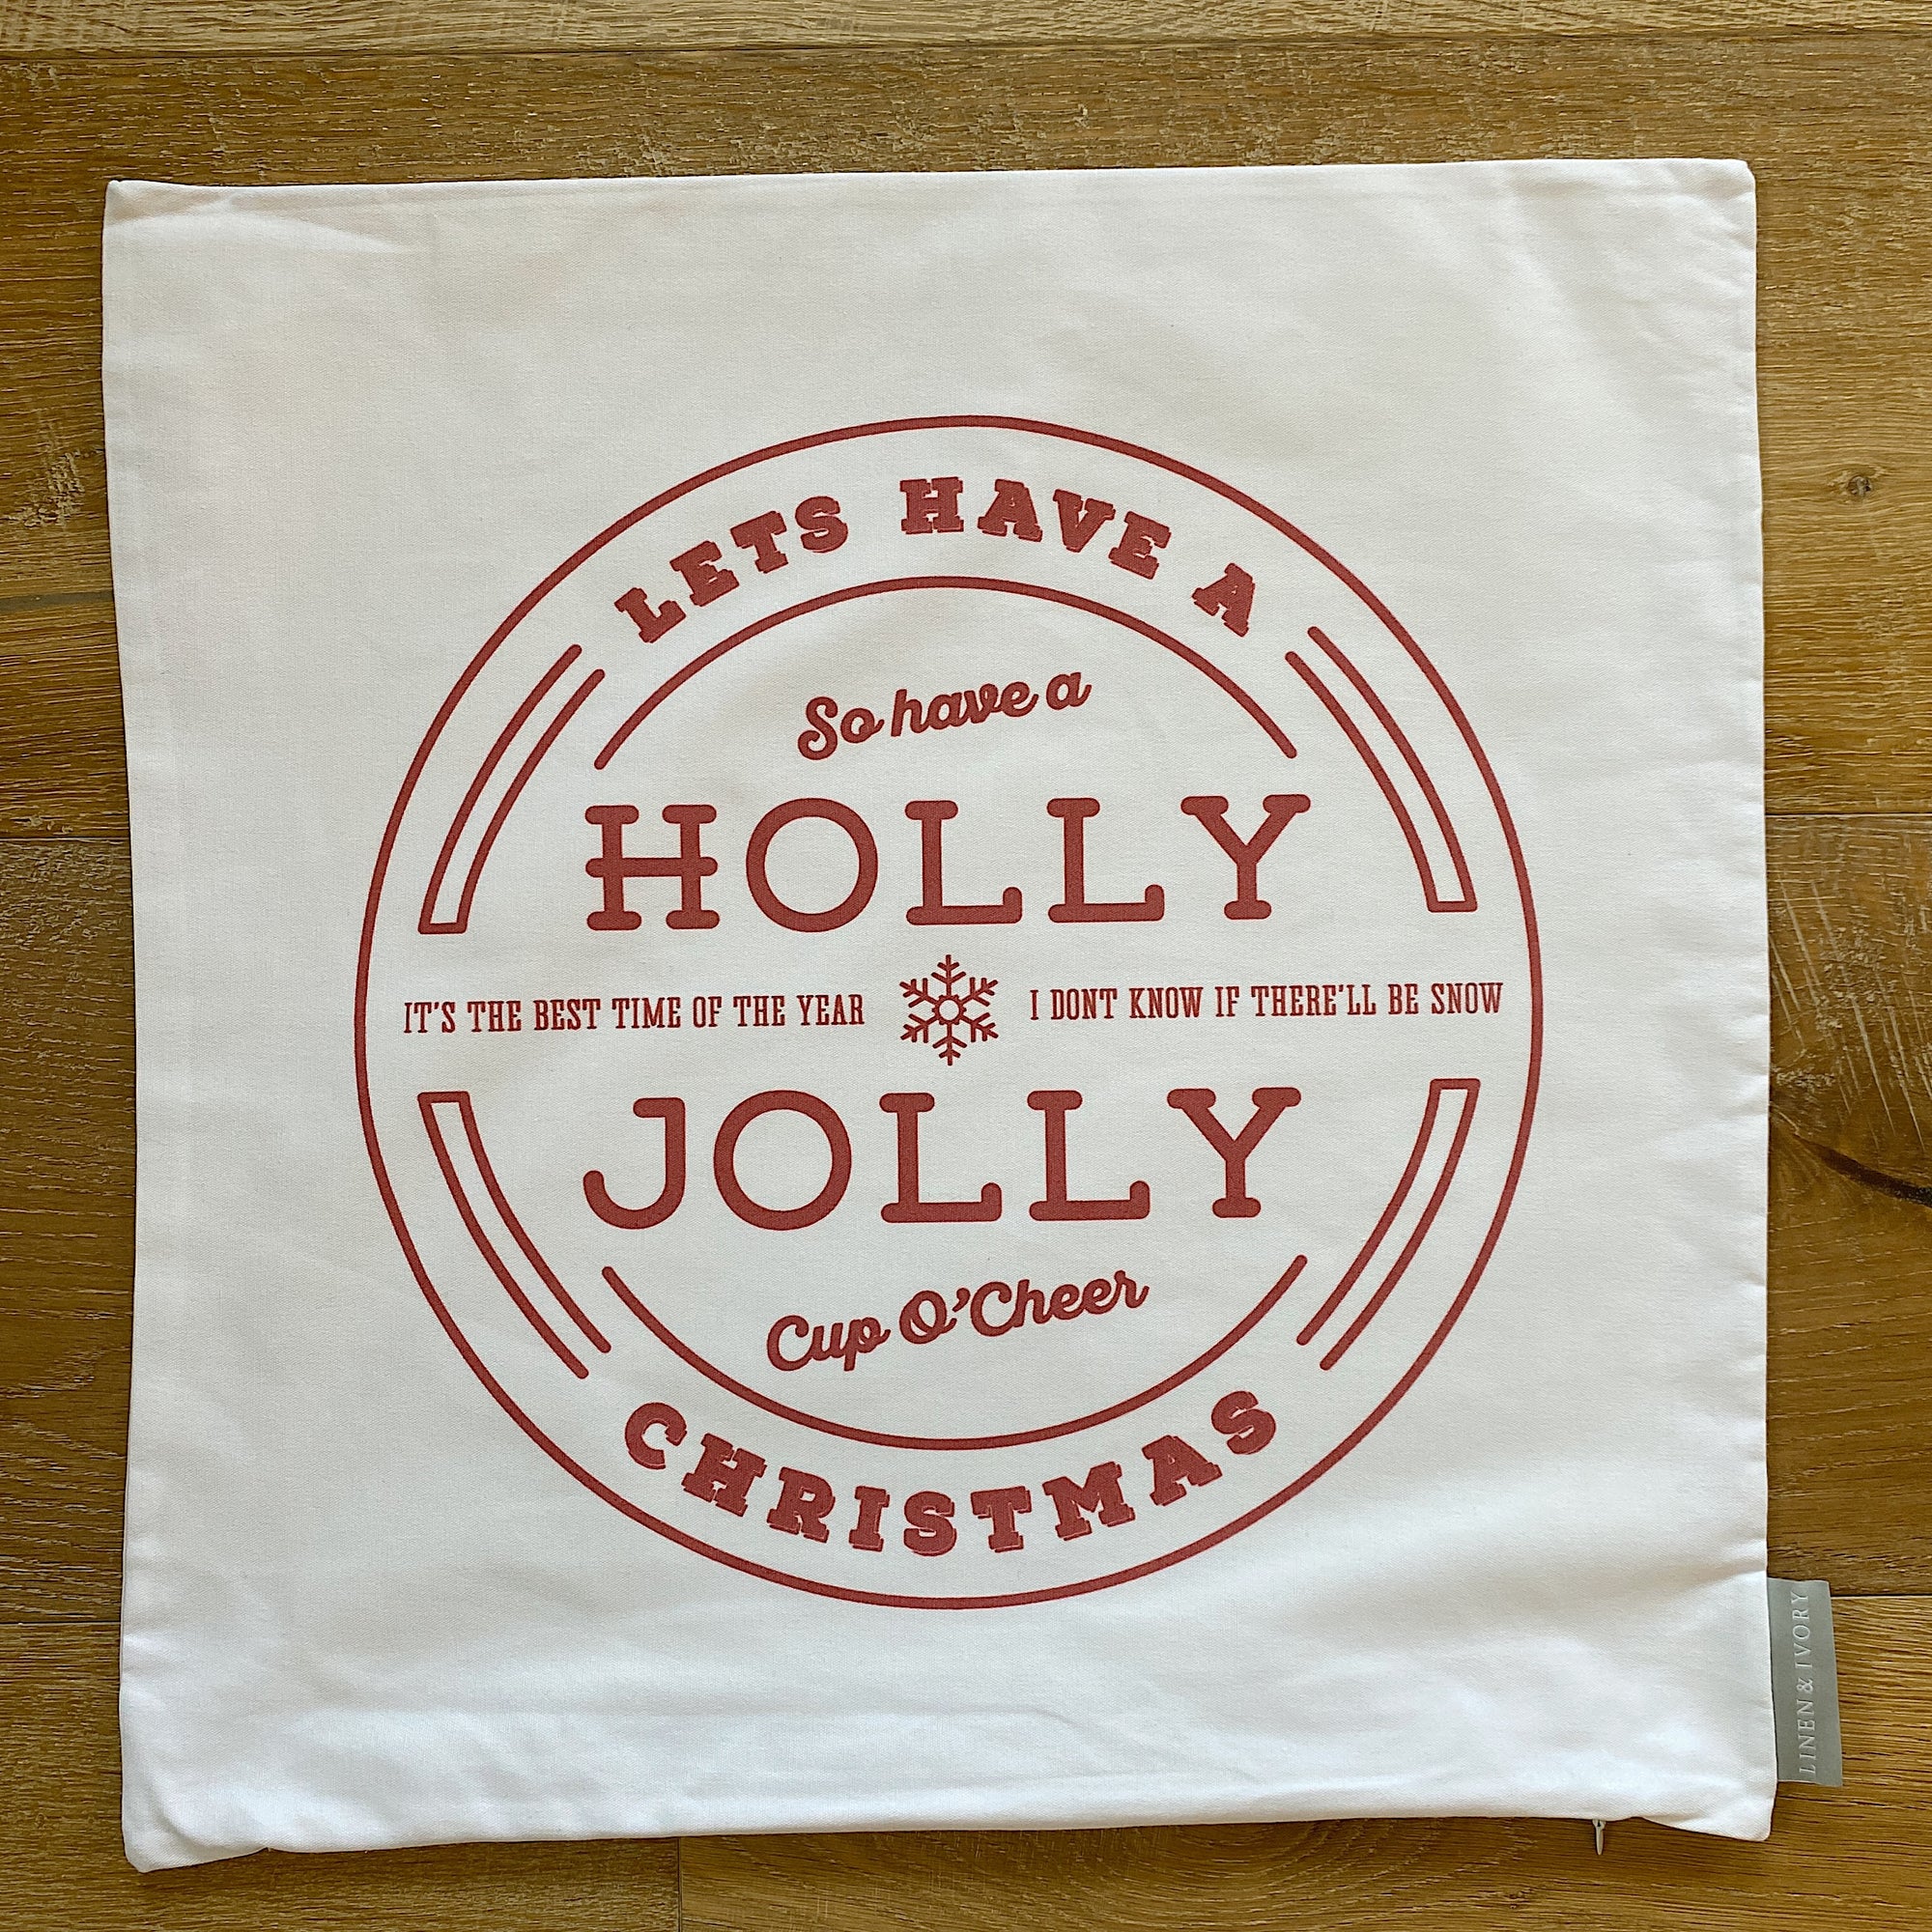 SALE-"NEW" 20" Holly Jolly Pillow Cover (White Canvas)